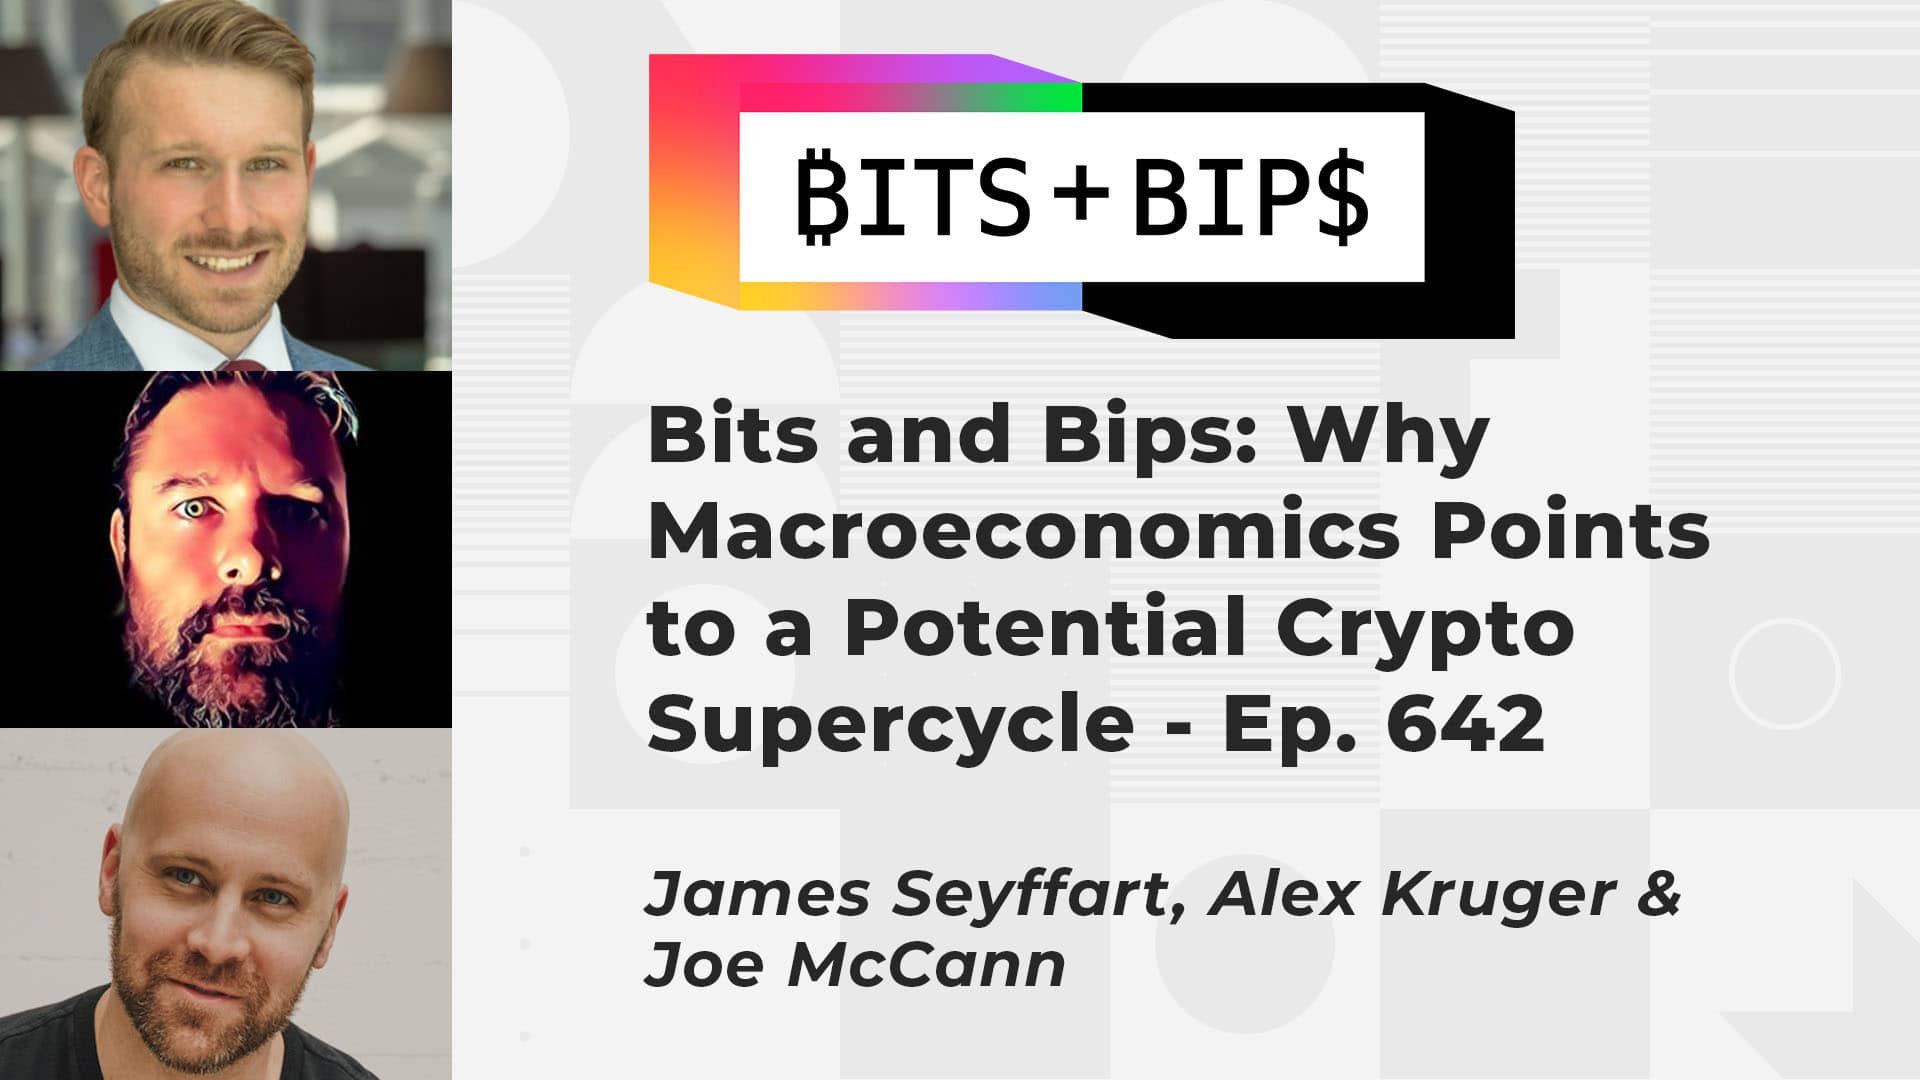 Bits + Bips: Does Macroeconomics Point to a Potential Crypto Supercycle? - Ep. 642